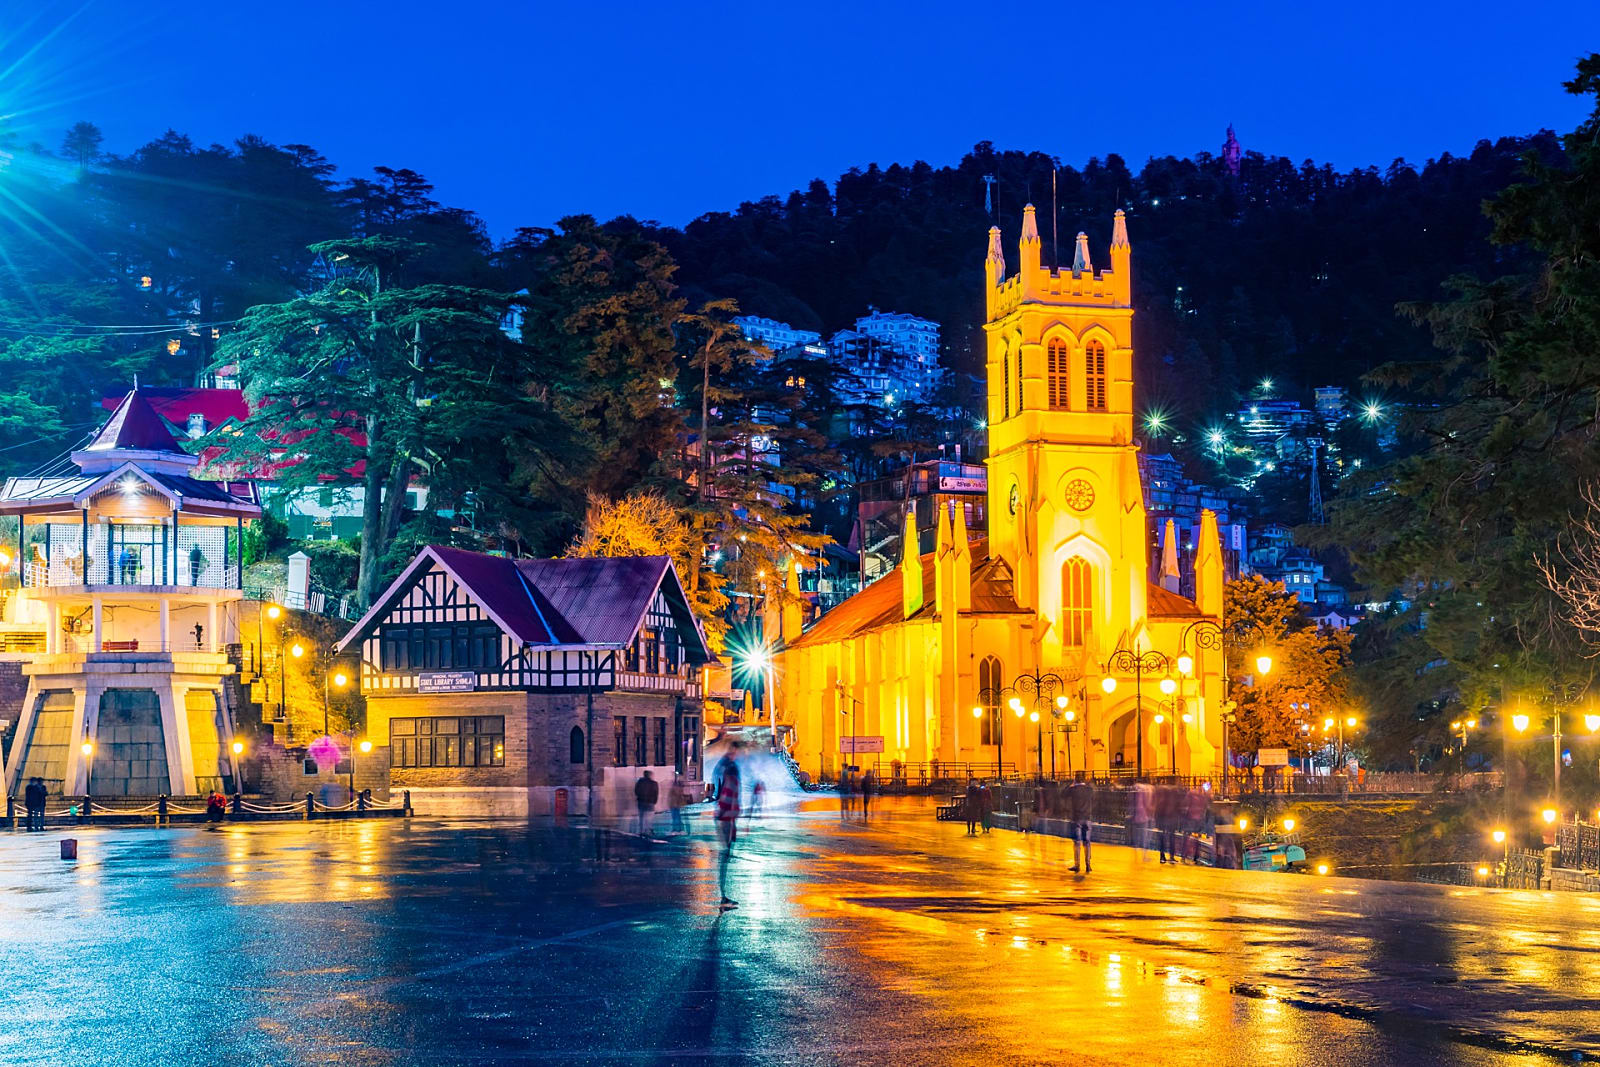 Shimla is the best place for Honeymoon and nature tour. In Shimla, you find the tradition and lots of places to visit, Shimla is also known as Heaven on Earth, so visit Shimla is the most beautiful adventure of your life. best time duration - November to February